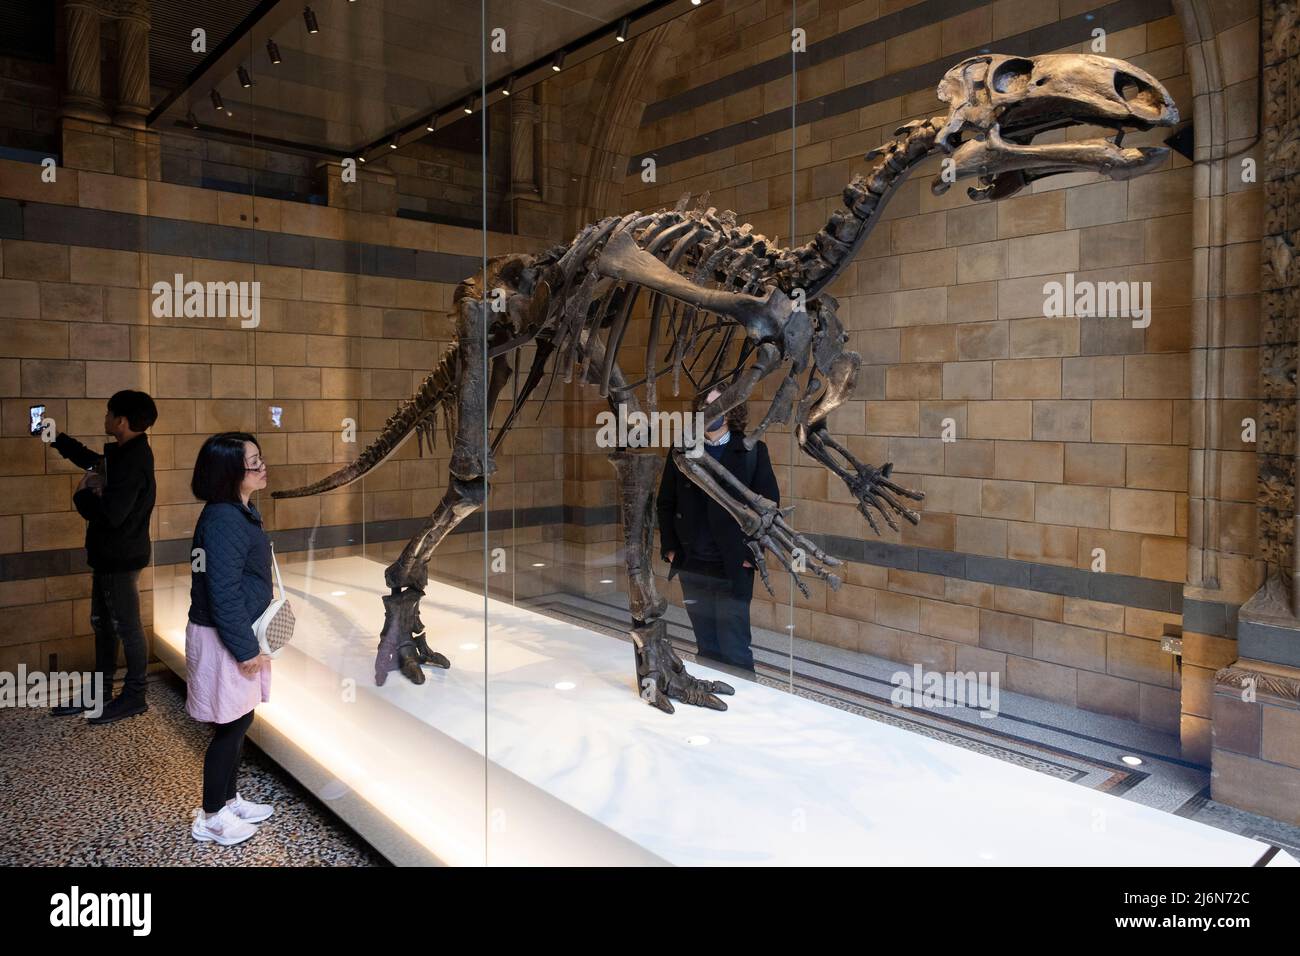 Visitors interact with Mantellisaurus Atherfieldensis or Iguanodon at the Natural History Museum on 27th April 2022 in London, United Kingdom. This dinosaur was renamed after the great palaeontologist Gideon Mantell. The museum exhibits a vast range of specimens from various segments of natural history. The museum is home to life and earth science specimens comprising some 80 million items within five main collections: botany, entomology, mineralogy, paleontology and zoology. The museum is a centre of research specialising in taxonomy, identification and conservation. Stock Photo